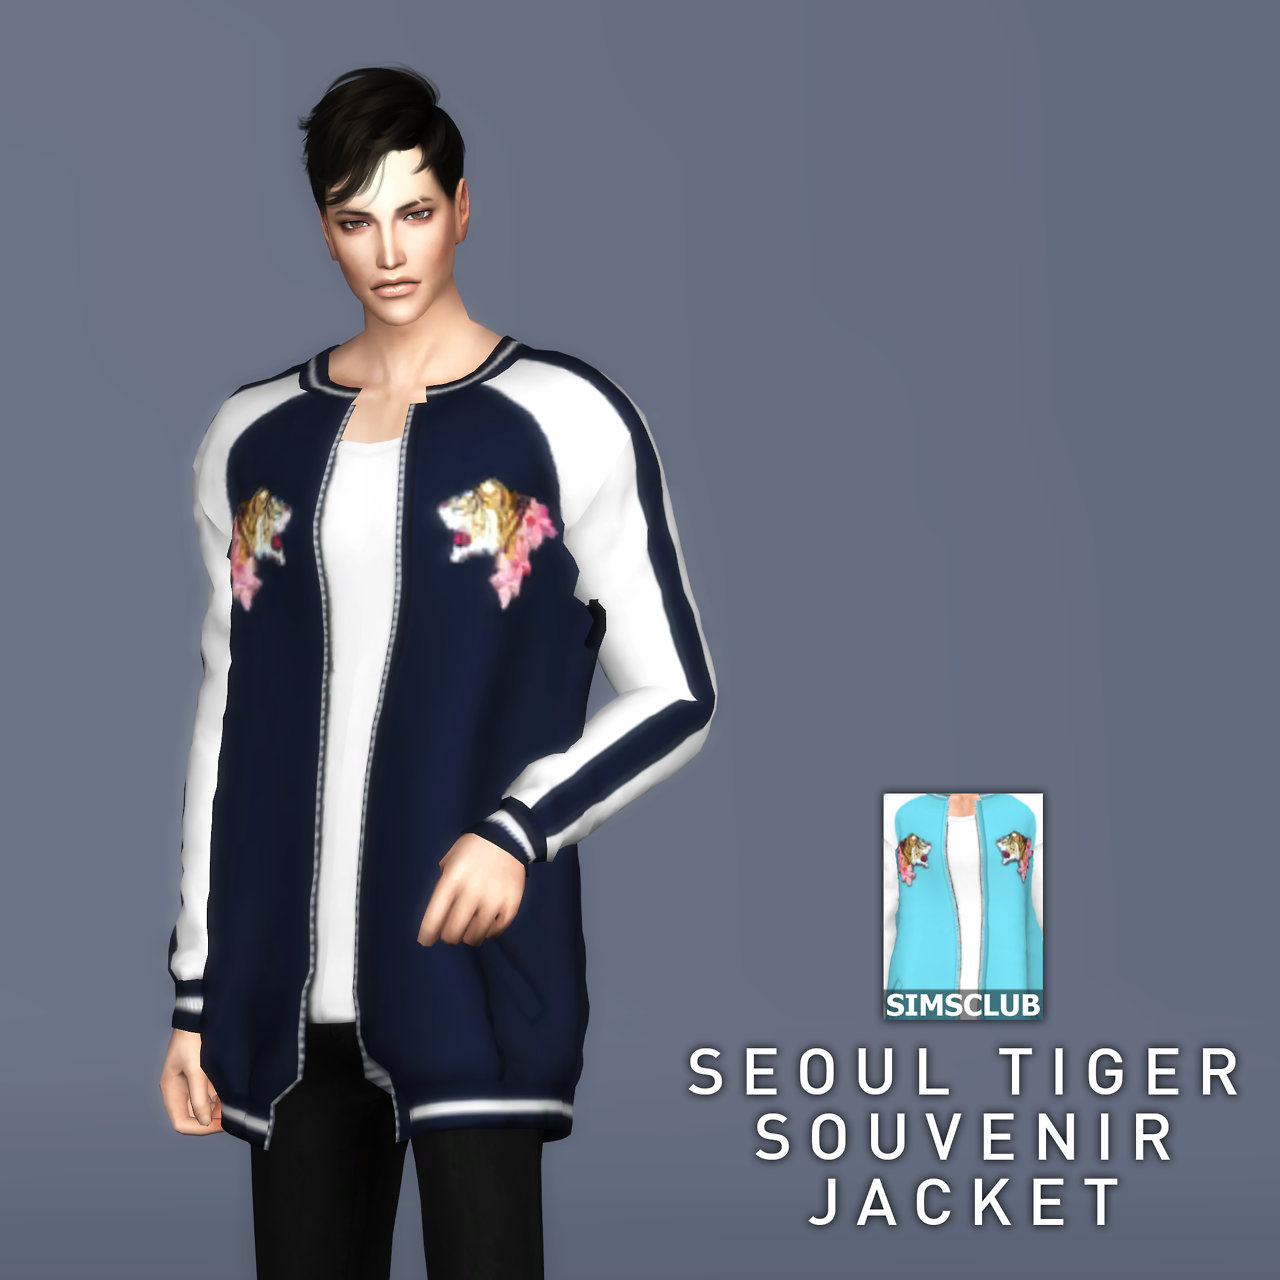 Sims 4 CC's The Best Male Clothing by